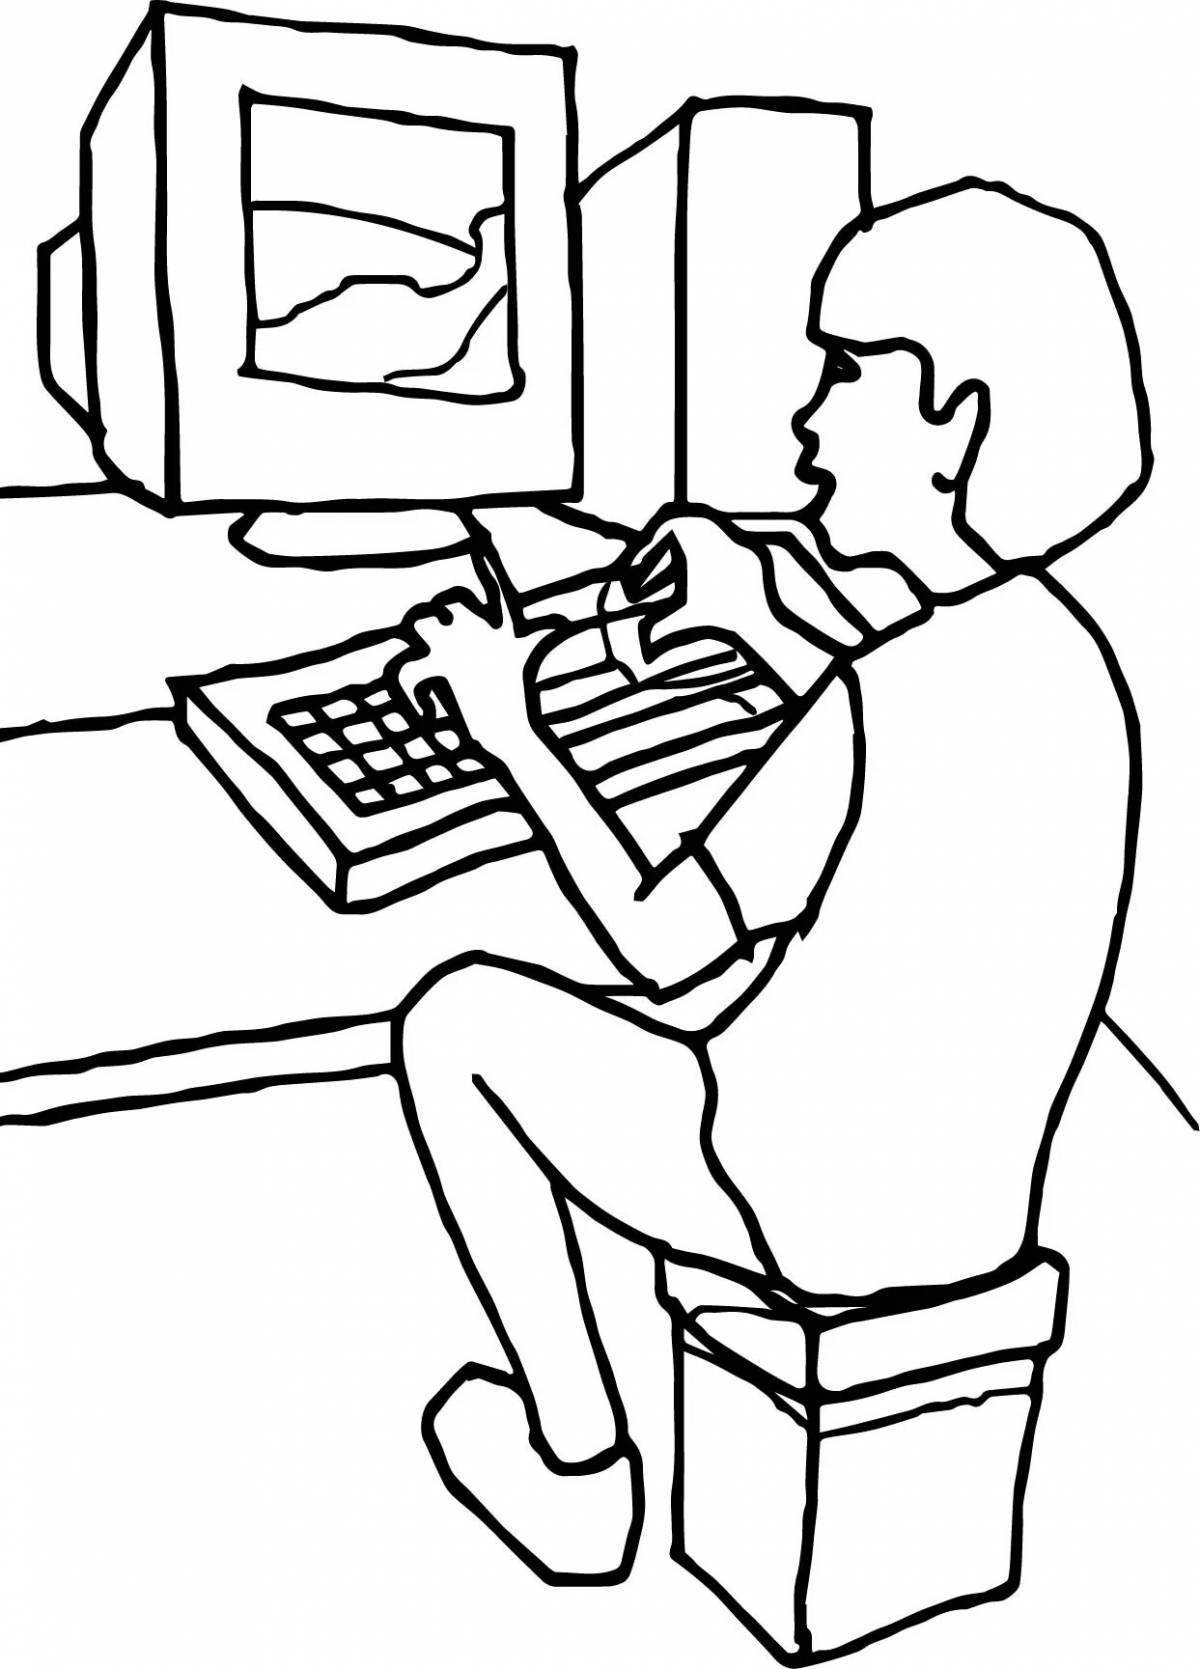 Color-frenzy child and computer coloring page